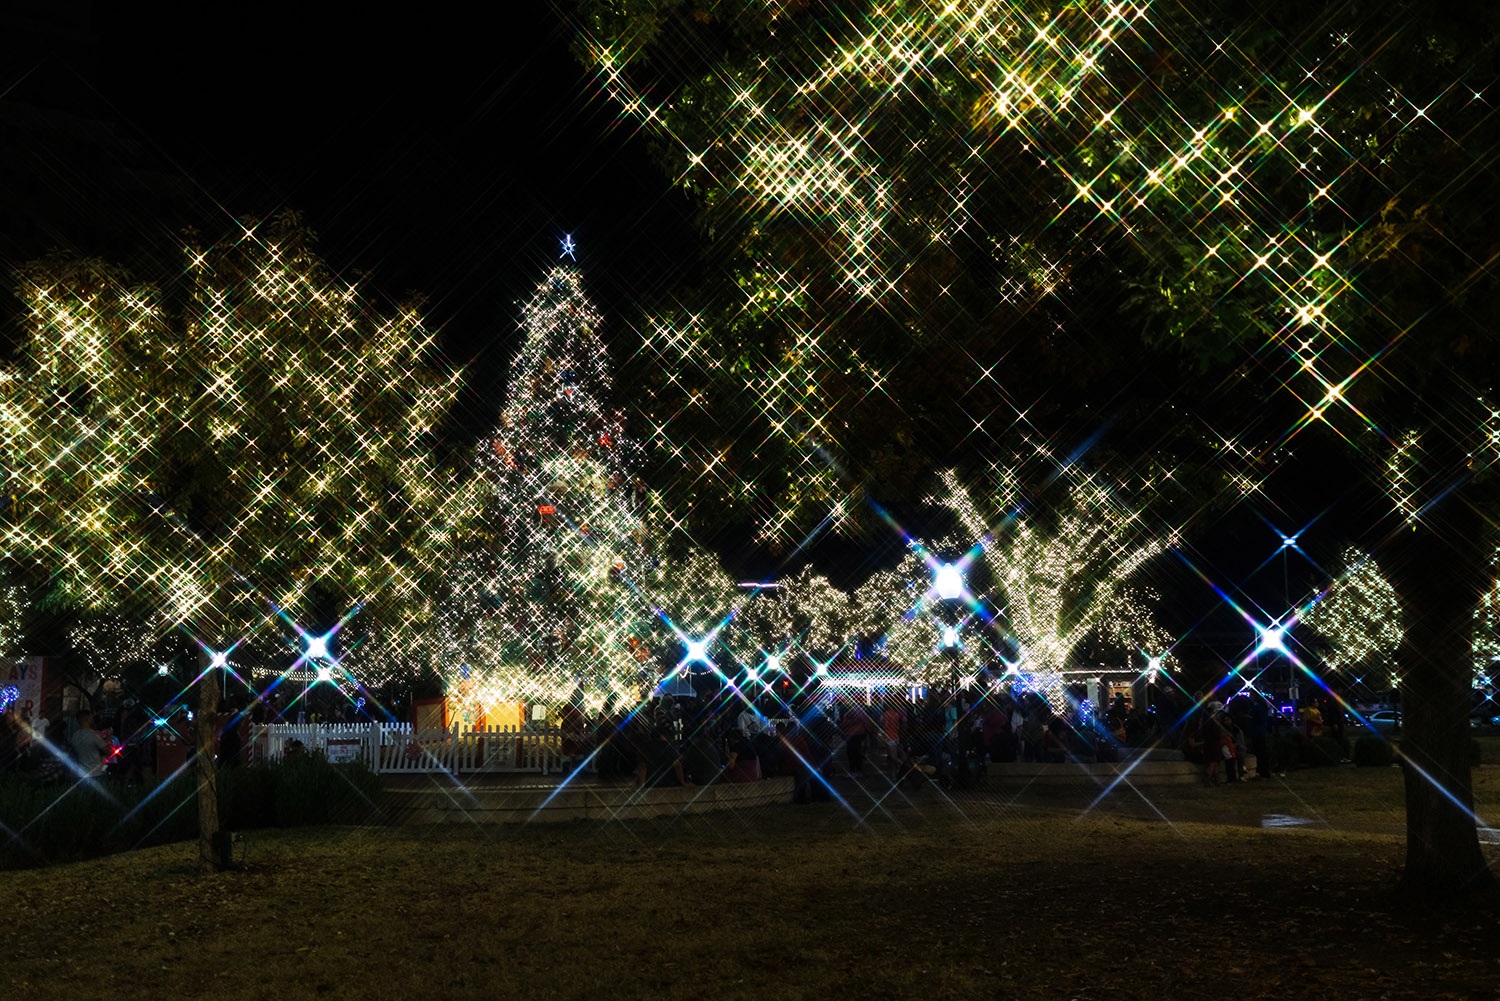 Thousands of people have gathered at Travis Park since the start of the holiday season in San Antonio to take photos in front of the H-E-B Christmas tree, and skate at the Rotary Ice Rink. Dec. 5, 2021. Photo by Chris Stokes | Heron contributor